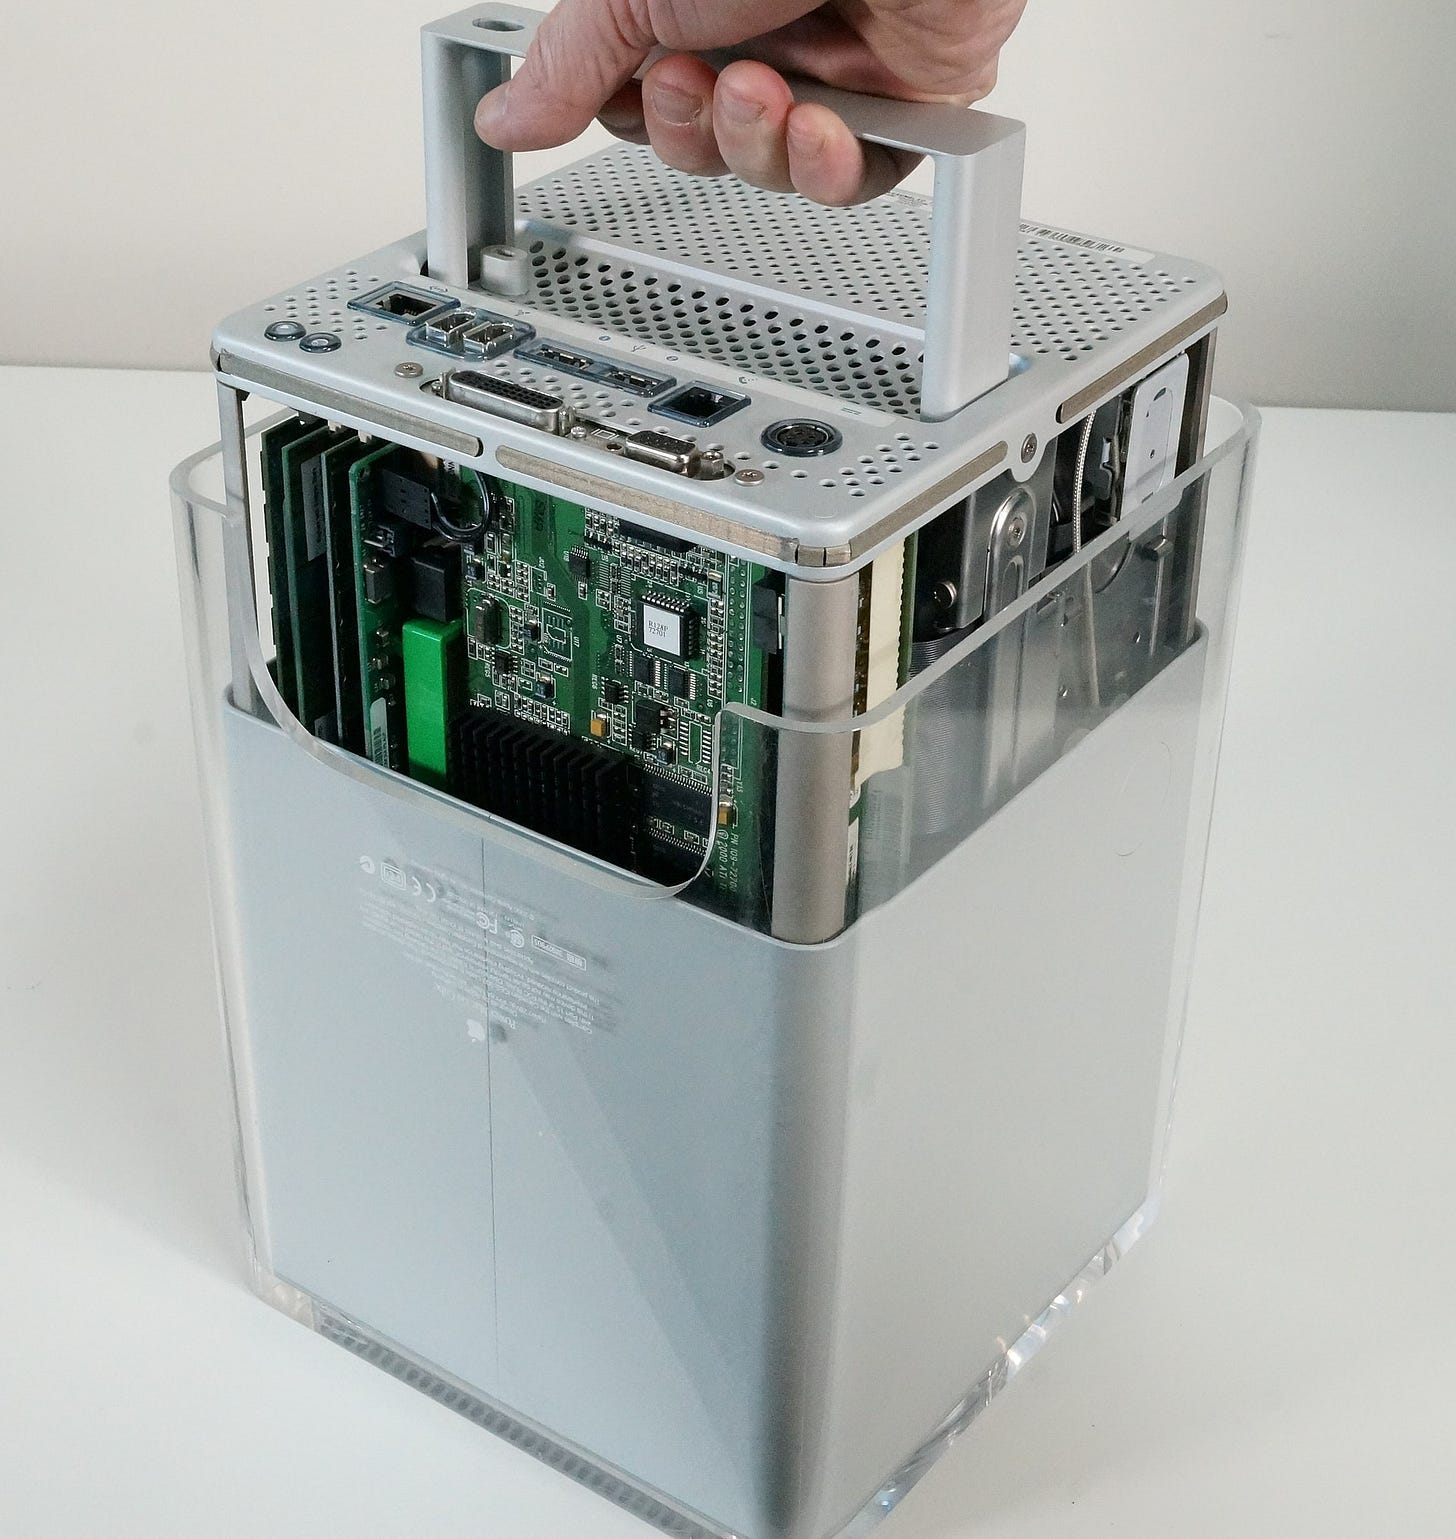 G4 Cube flipped upside down; a hand is pulling upward on a small handle, revealing green circuit boards and computer components within.